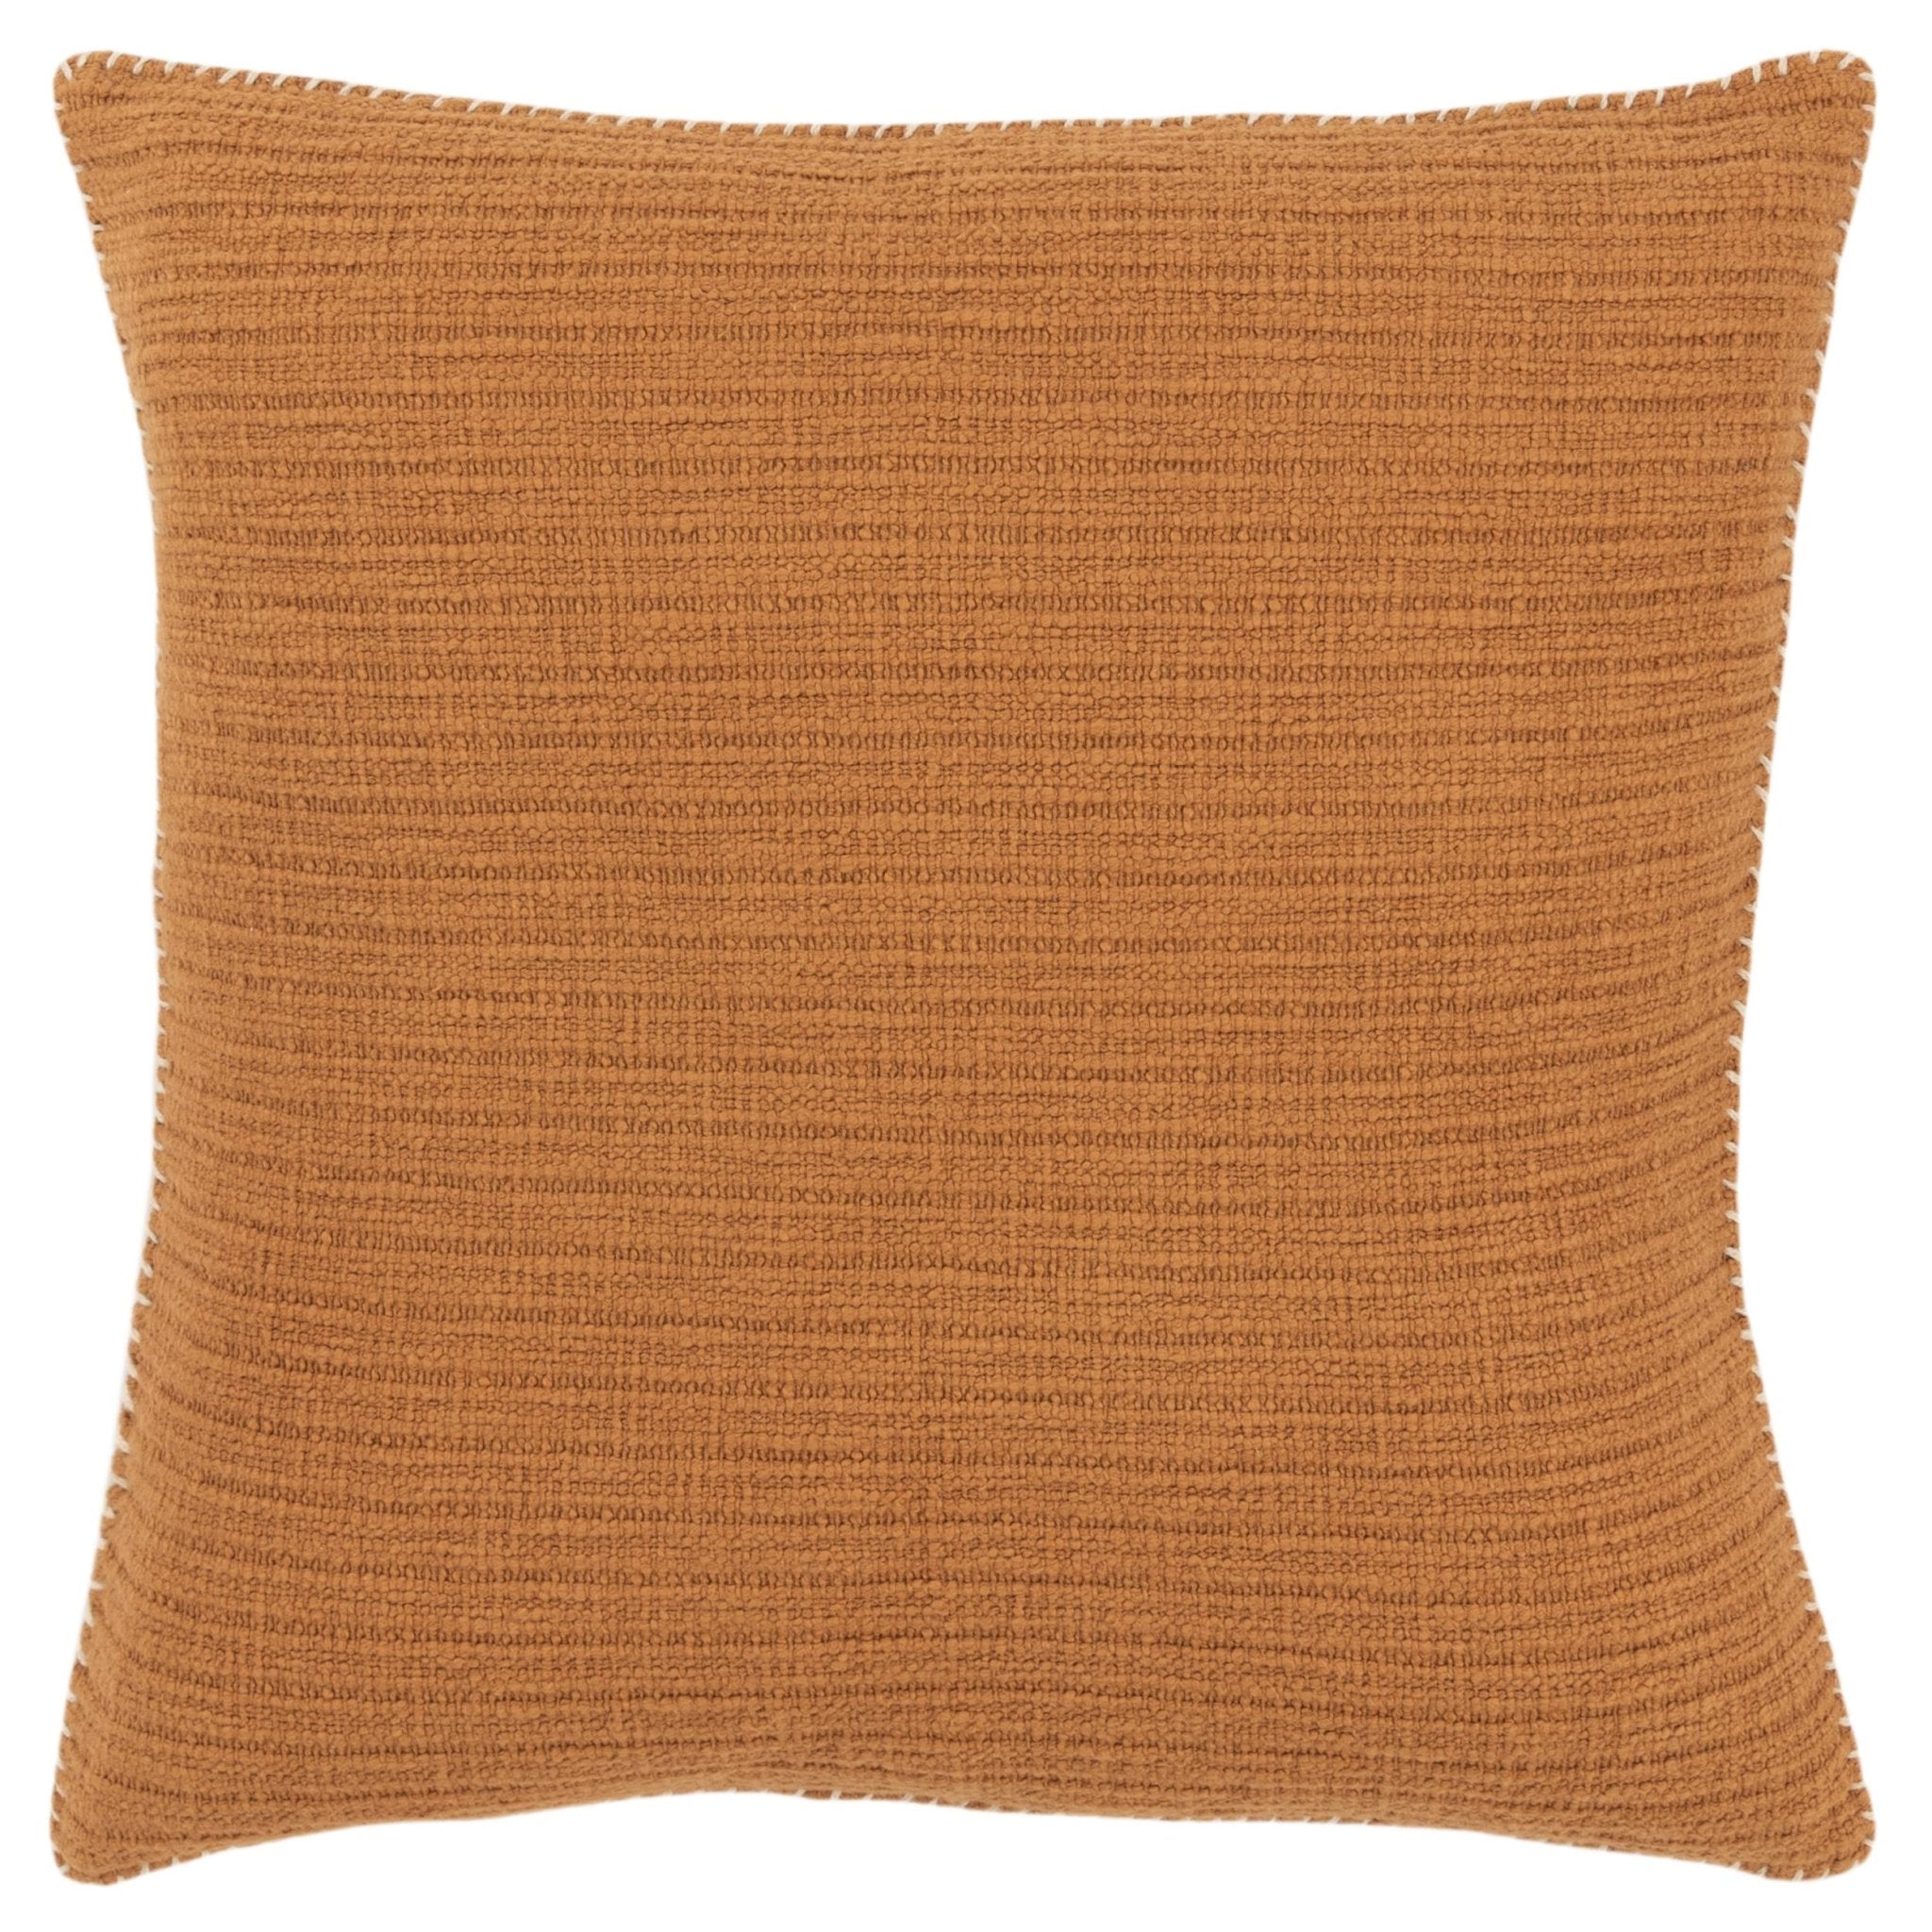 Woven Cotton Stripe Patterned Solid Pillow Cover - Decorative Pillows